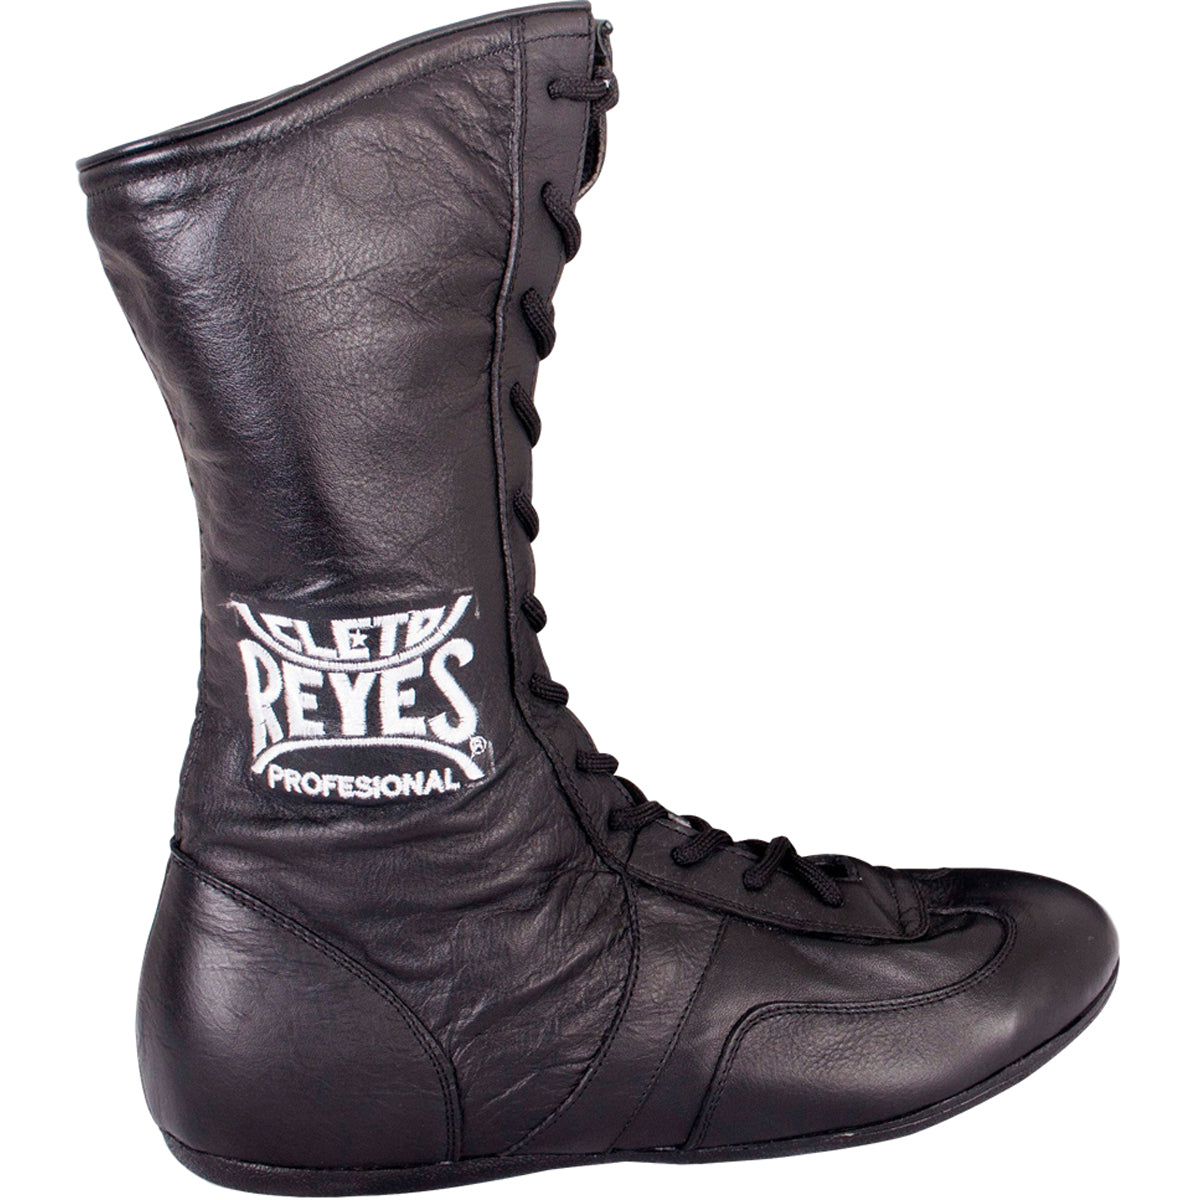 Cleto Reyes Leather Lace Up High Top Boxing Shoes - Size: 7 - Black Cleto Reyes